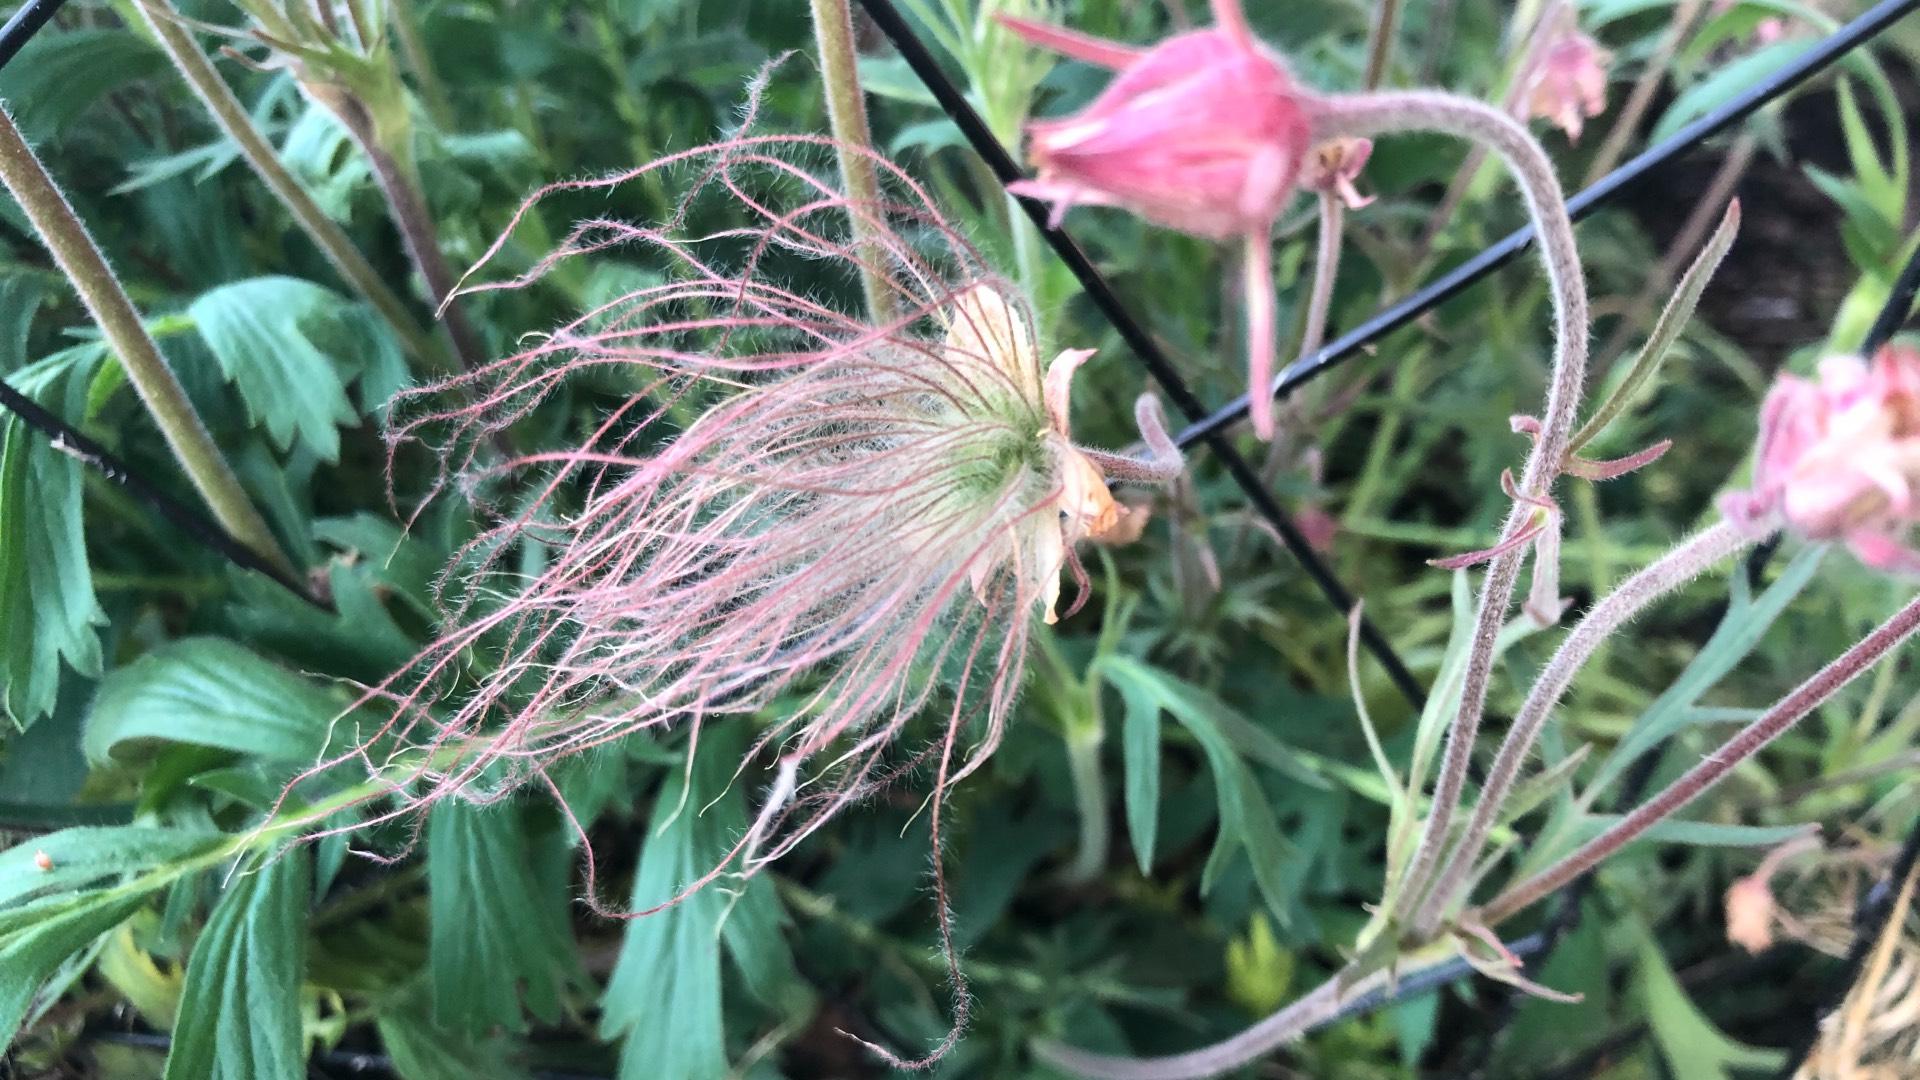 Prairie smoke is one of the few native plants that falls under the height limit imposed by Chicago's weed ordinance. (Patty Wetli / WTTW News)